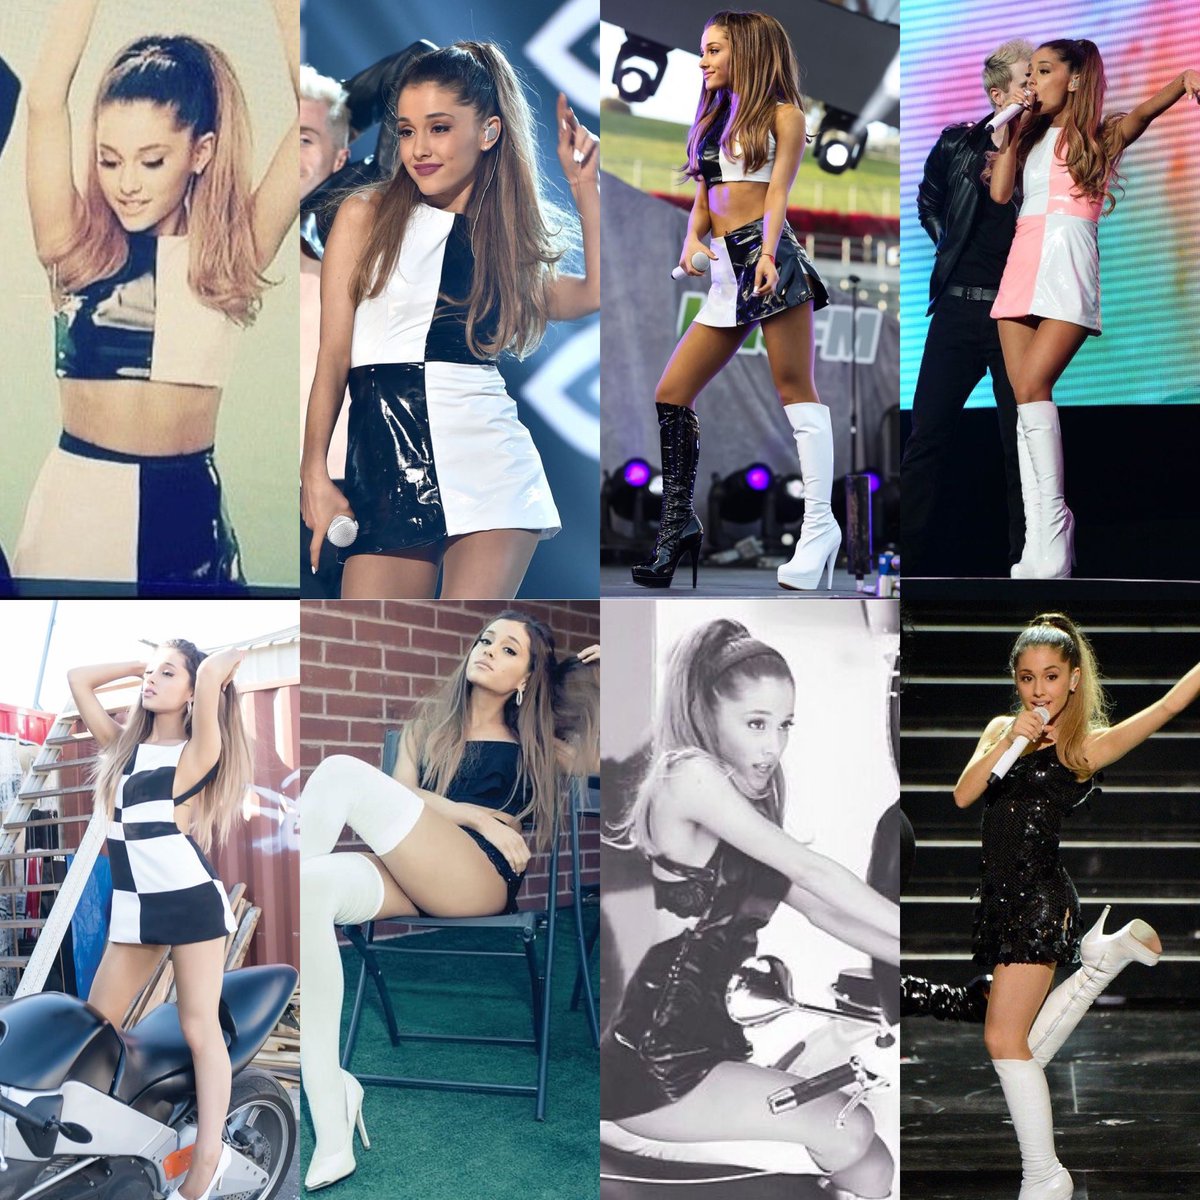 ariana’s styling for problem is so iconic